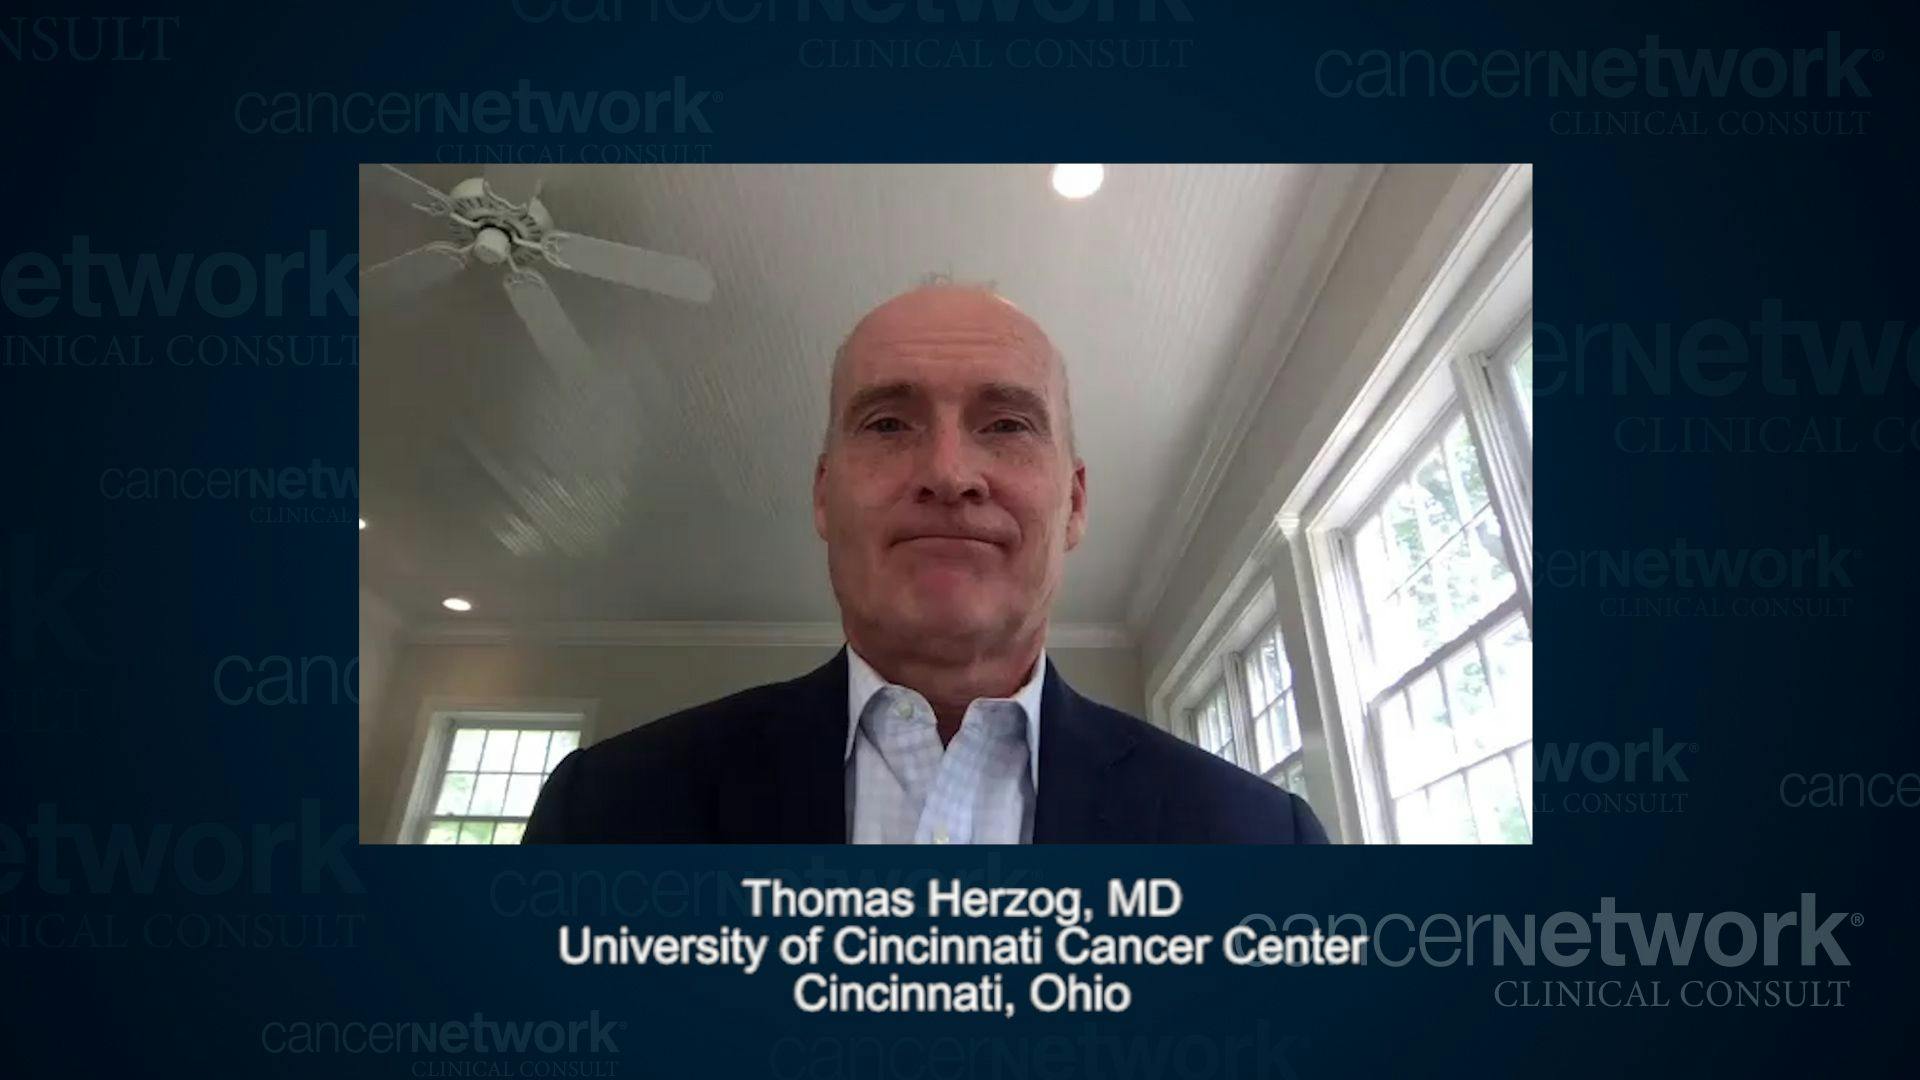 Future Directions for Treatment of Ovarian Cancer